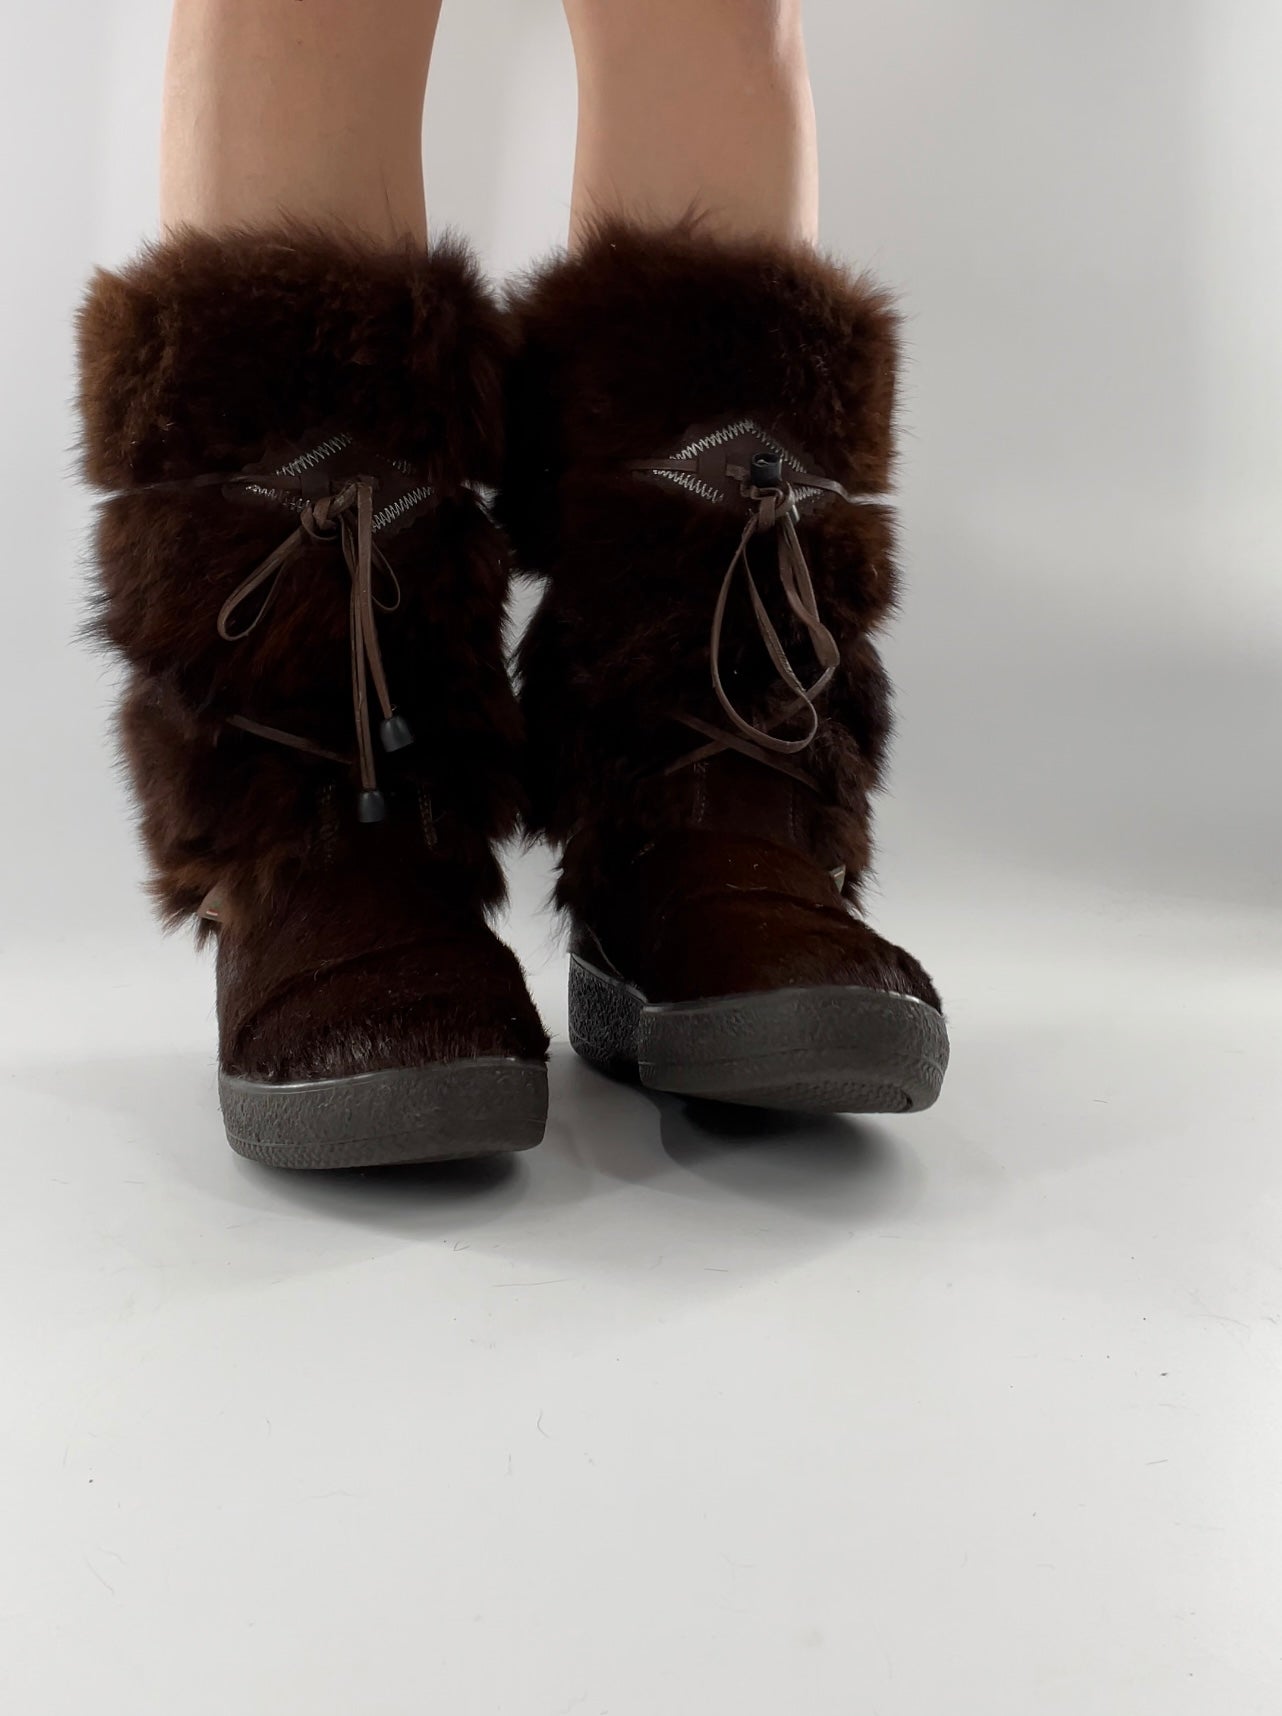 Pajar Vintage Brown Fur Boots - Made In Italy - Size 40